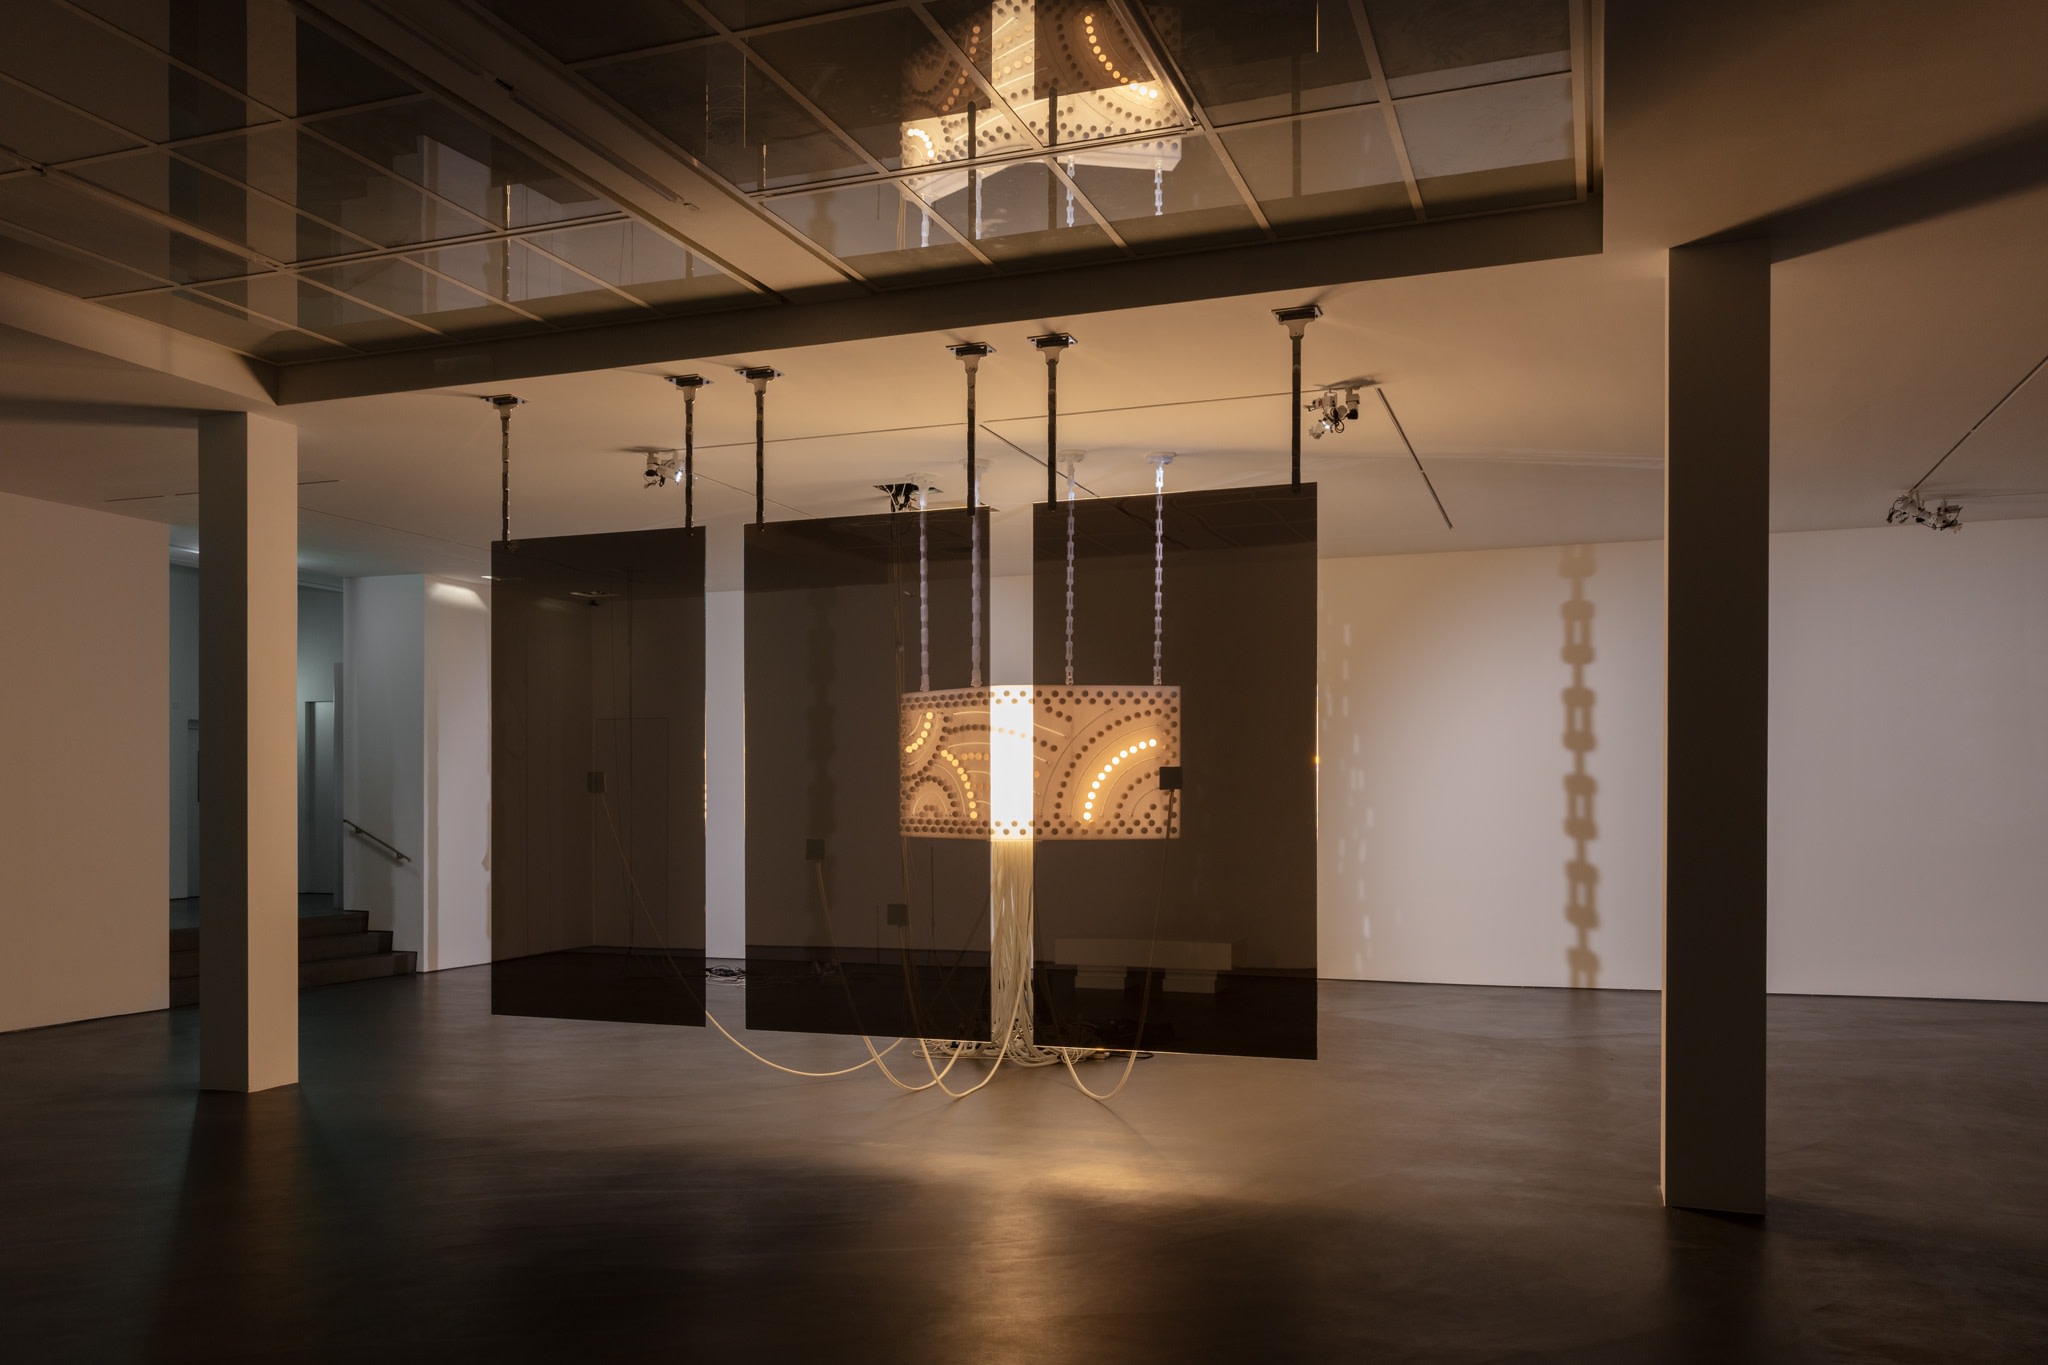 Philippe Parreno, Marquee, 2020, semi-opaque white Plexiglas, 231 light bulbs, 12 neon tubes (ø 14 mm), 46 m LED tape, DMX recorder, dimmers, transducers, light and sound program, acrylic chains, glass panels: two-way mirror, security glass, polished stainless steel chains, installation dimensions variable. Photo © Andrea Rossetti